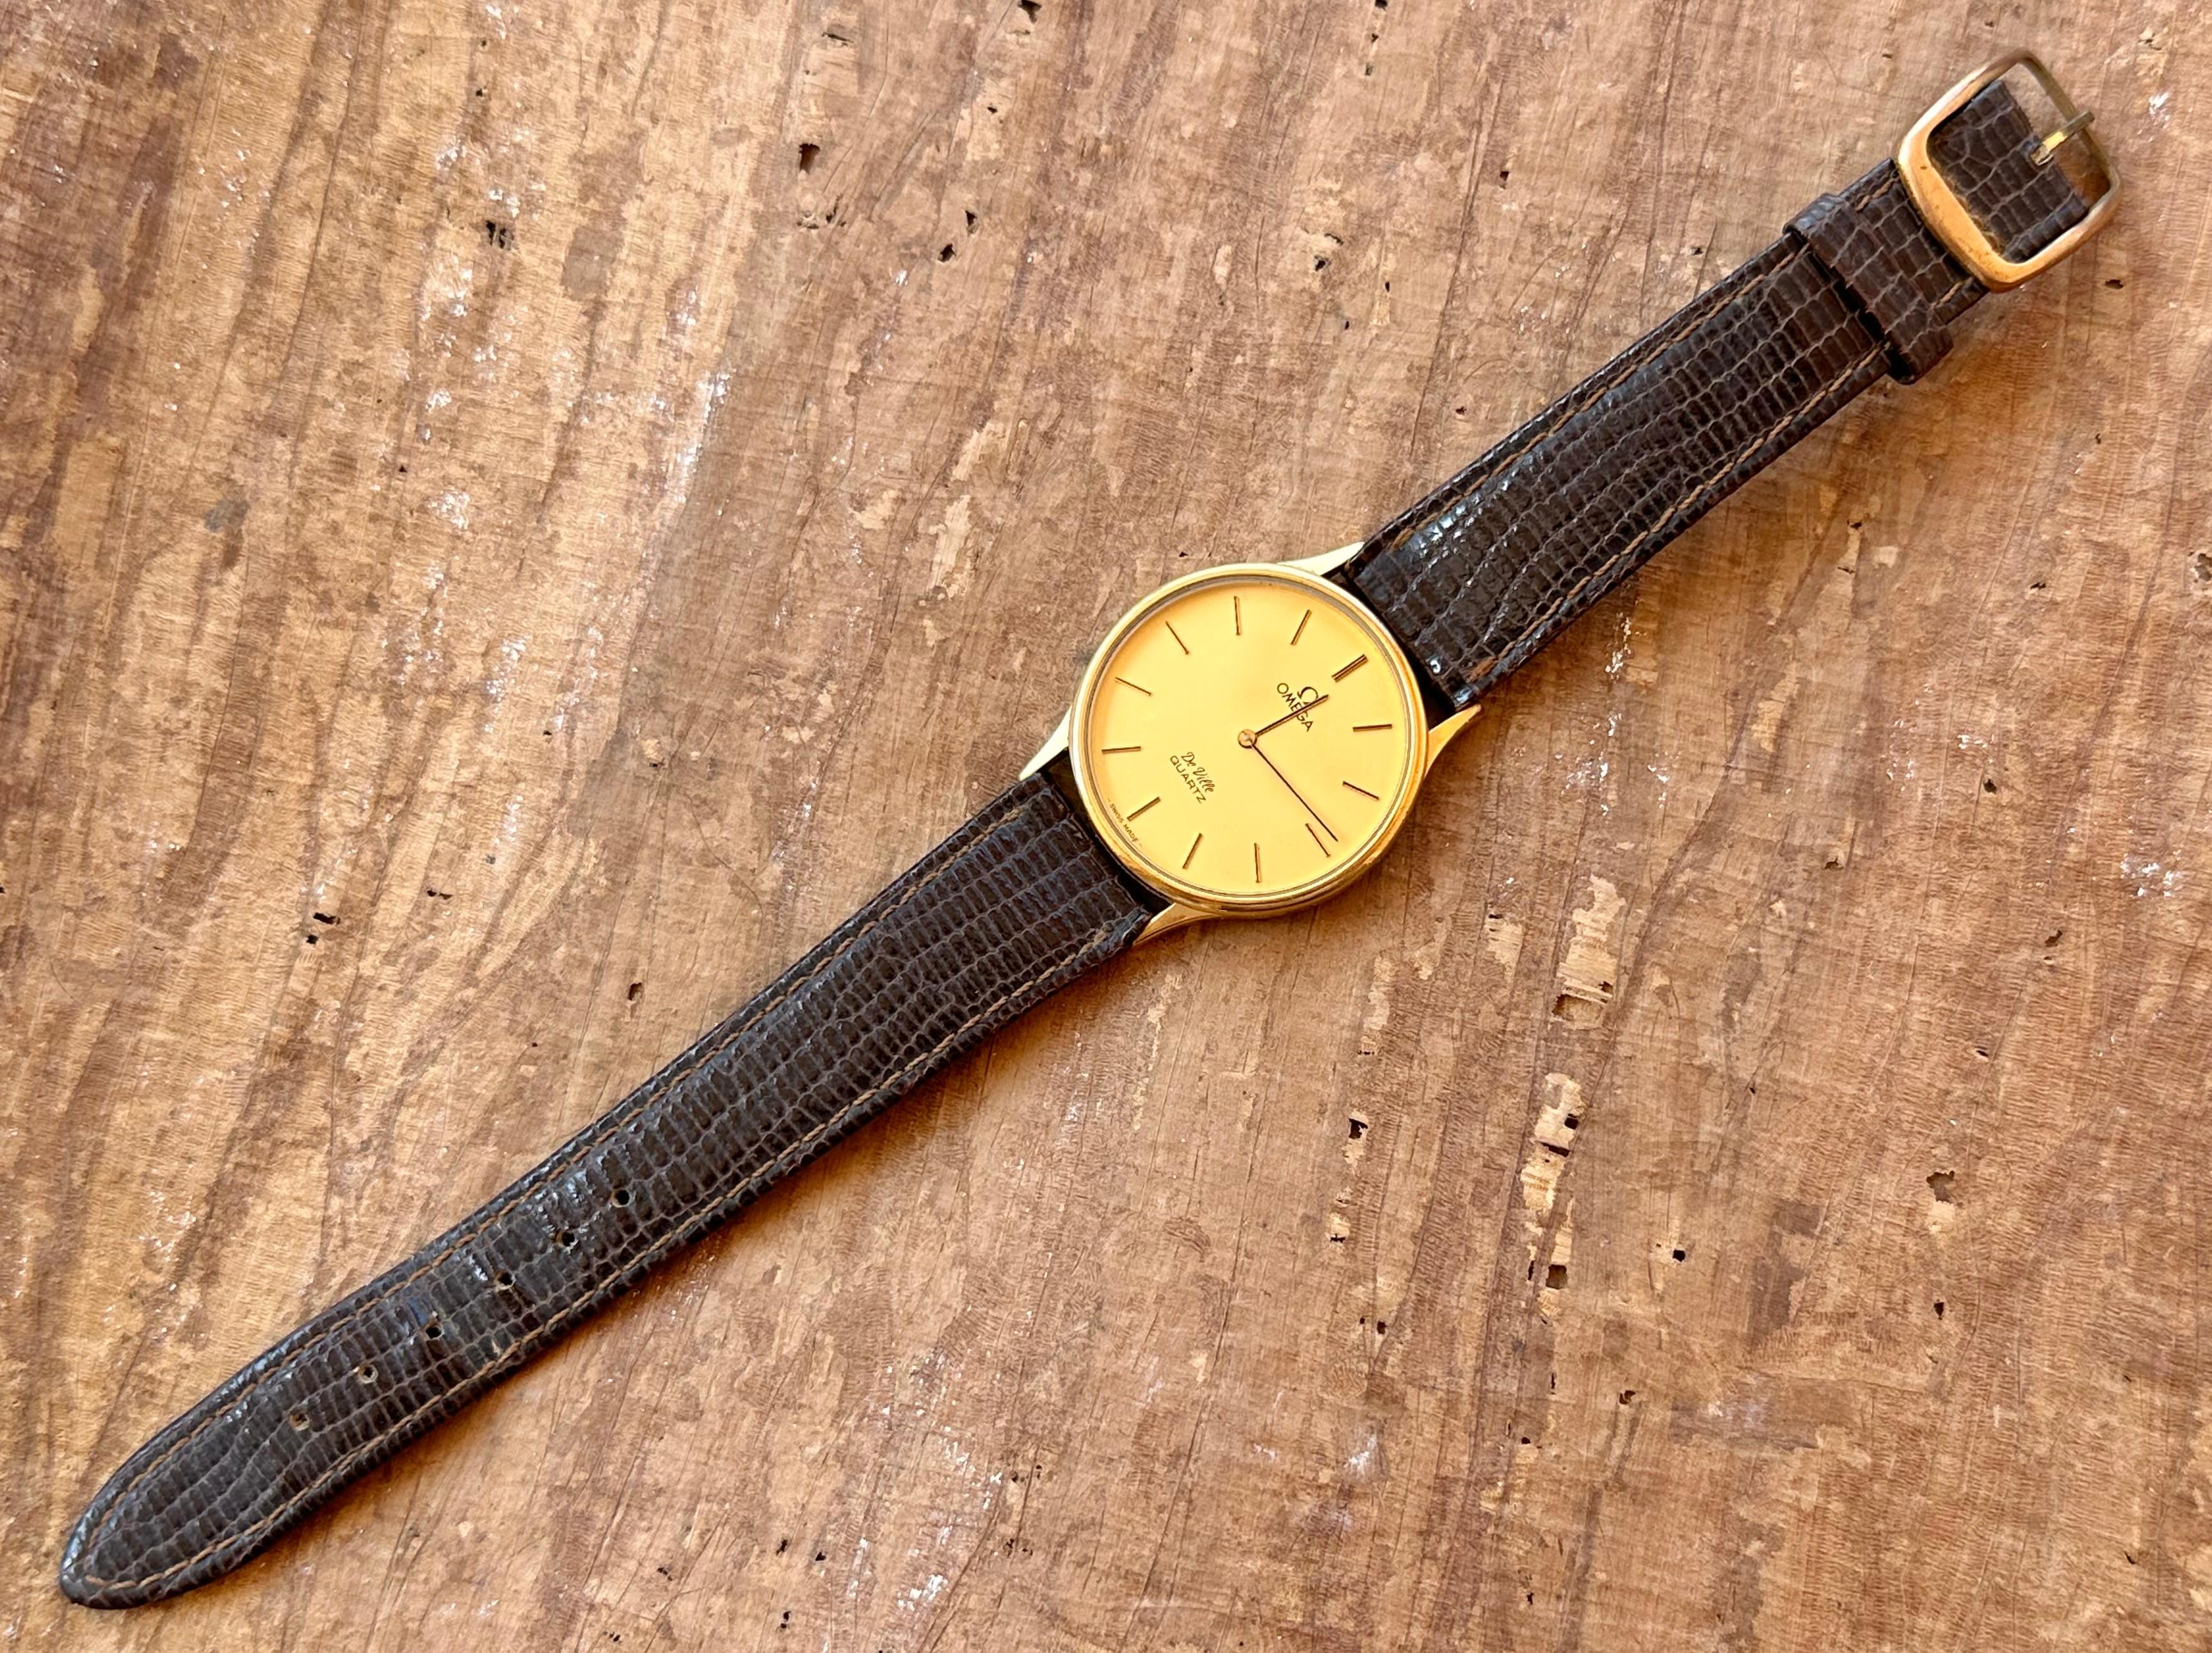 Vintage Omega De Ville 1365 Gold Plated Dress Watch In Good Condition For Sale In Toronto, CA